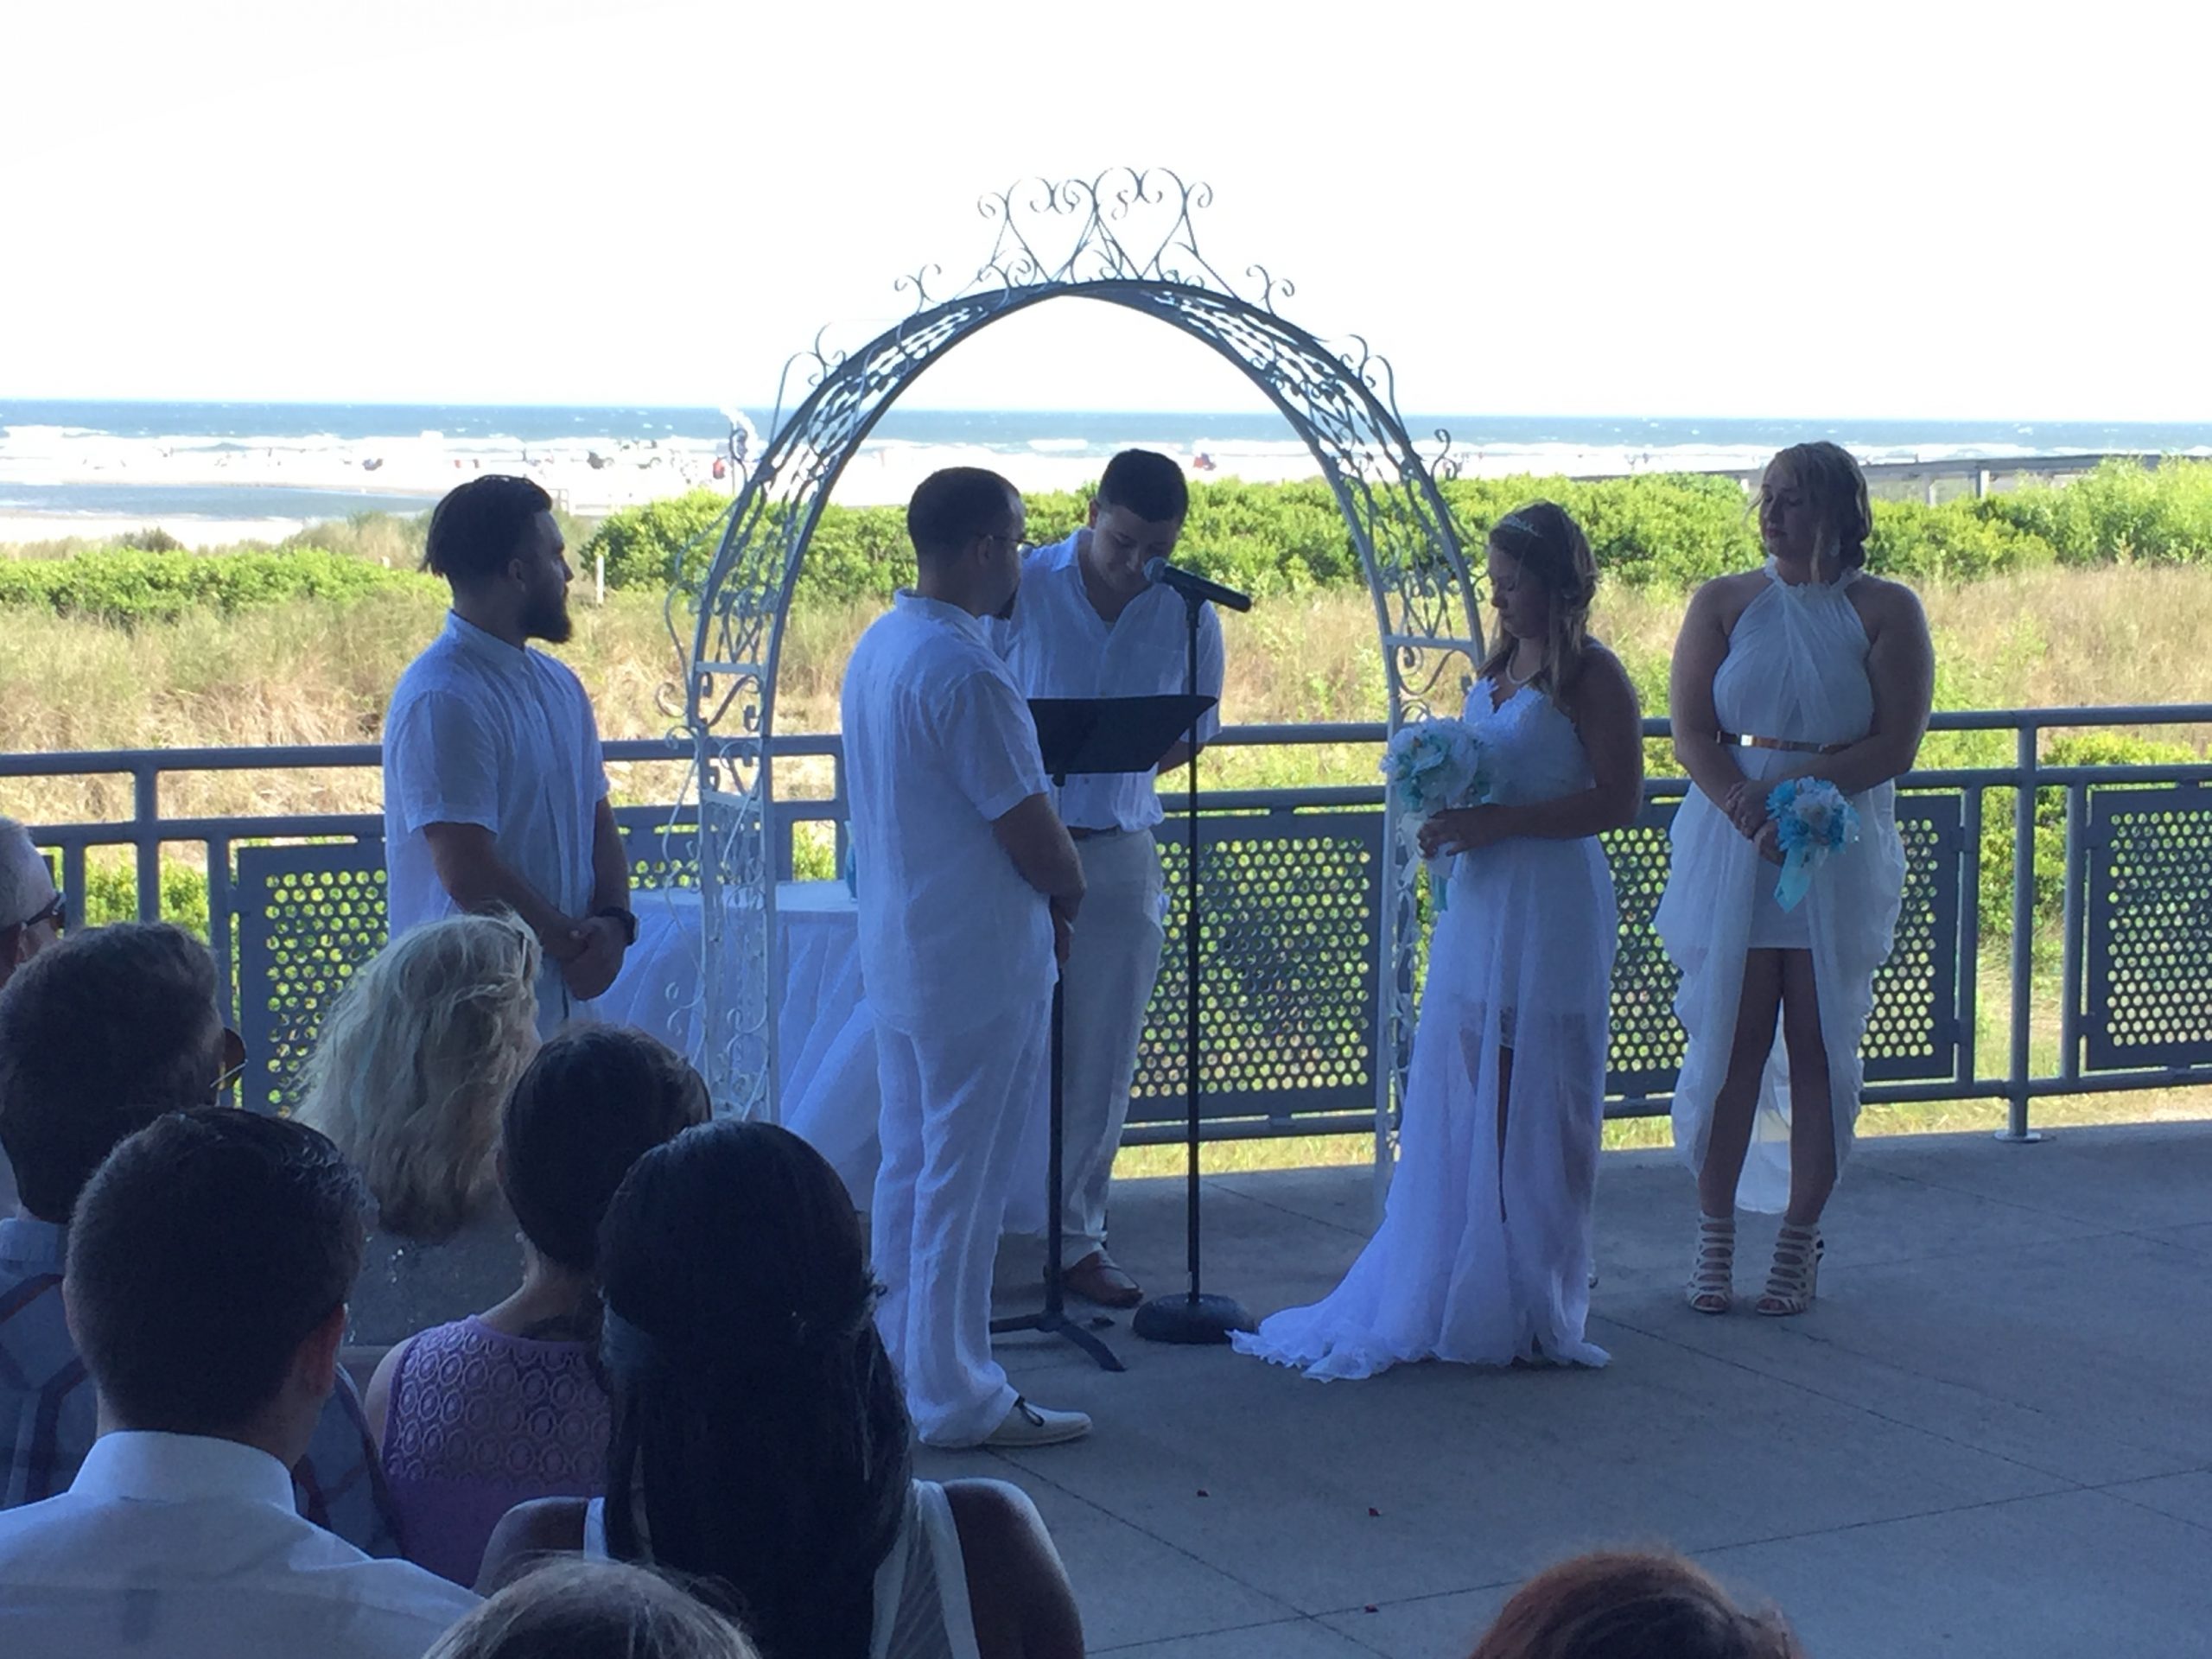 Corey and Jackson's ceremony with the beach in the background. Taken with my iPhone